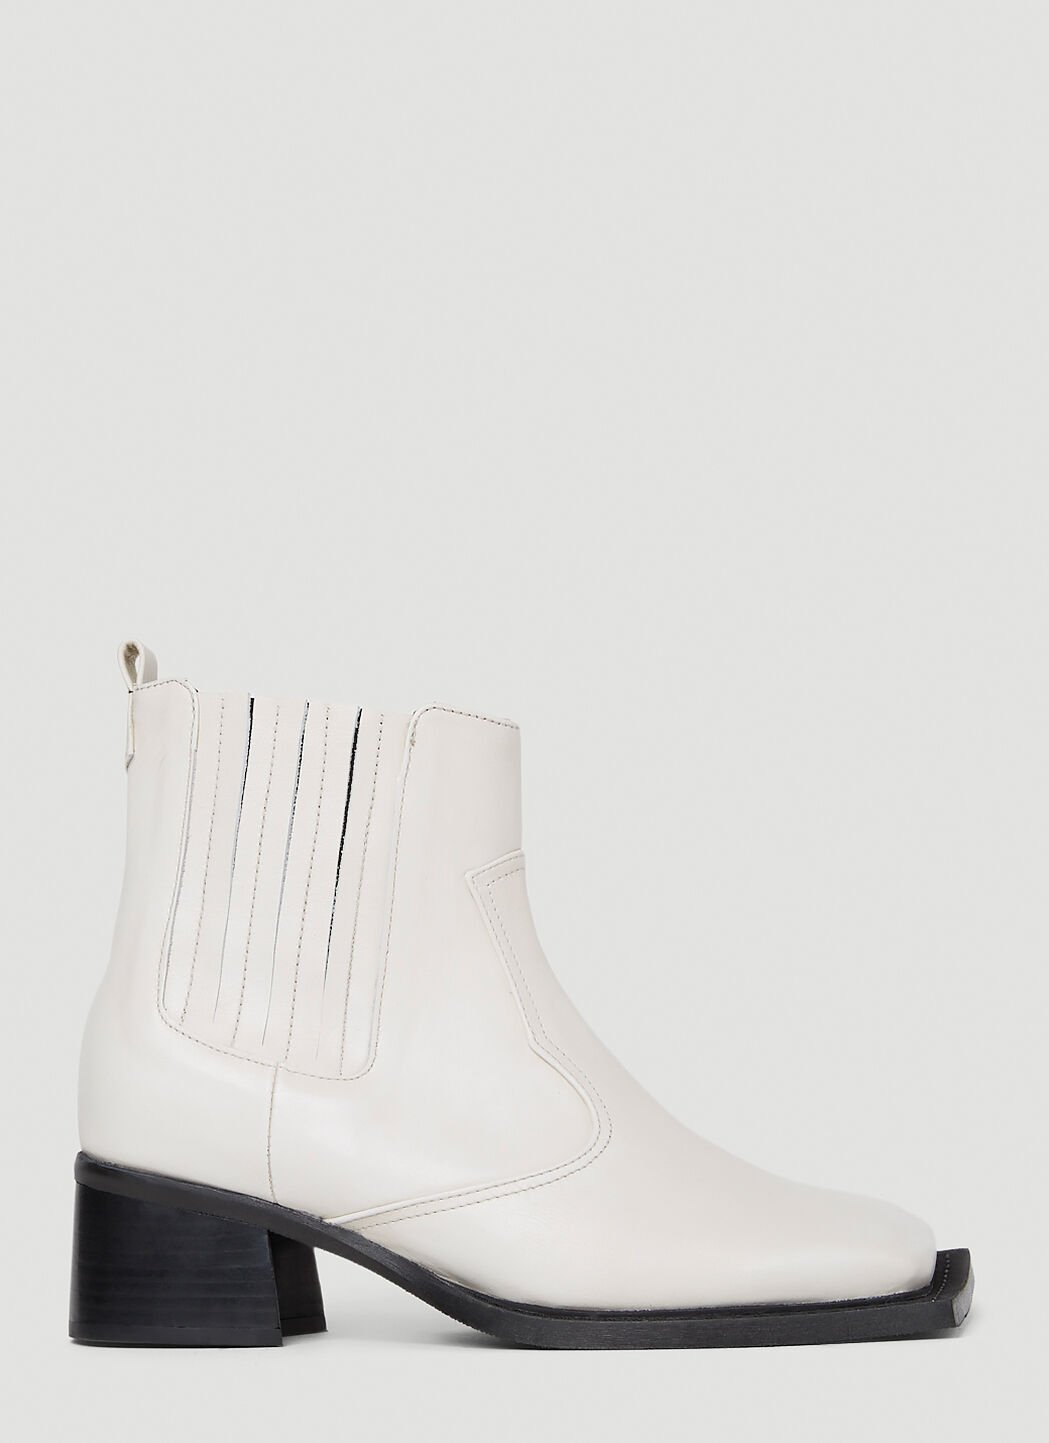 Moncler Grenoble Howler Ankle Boots レッド mog0153013